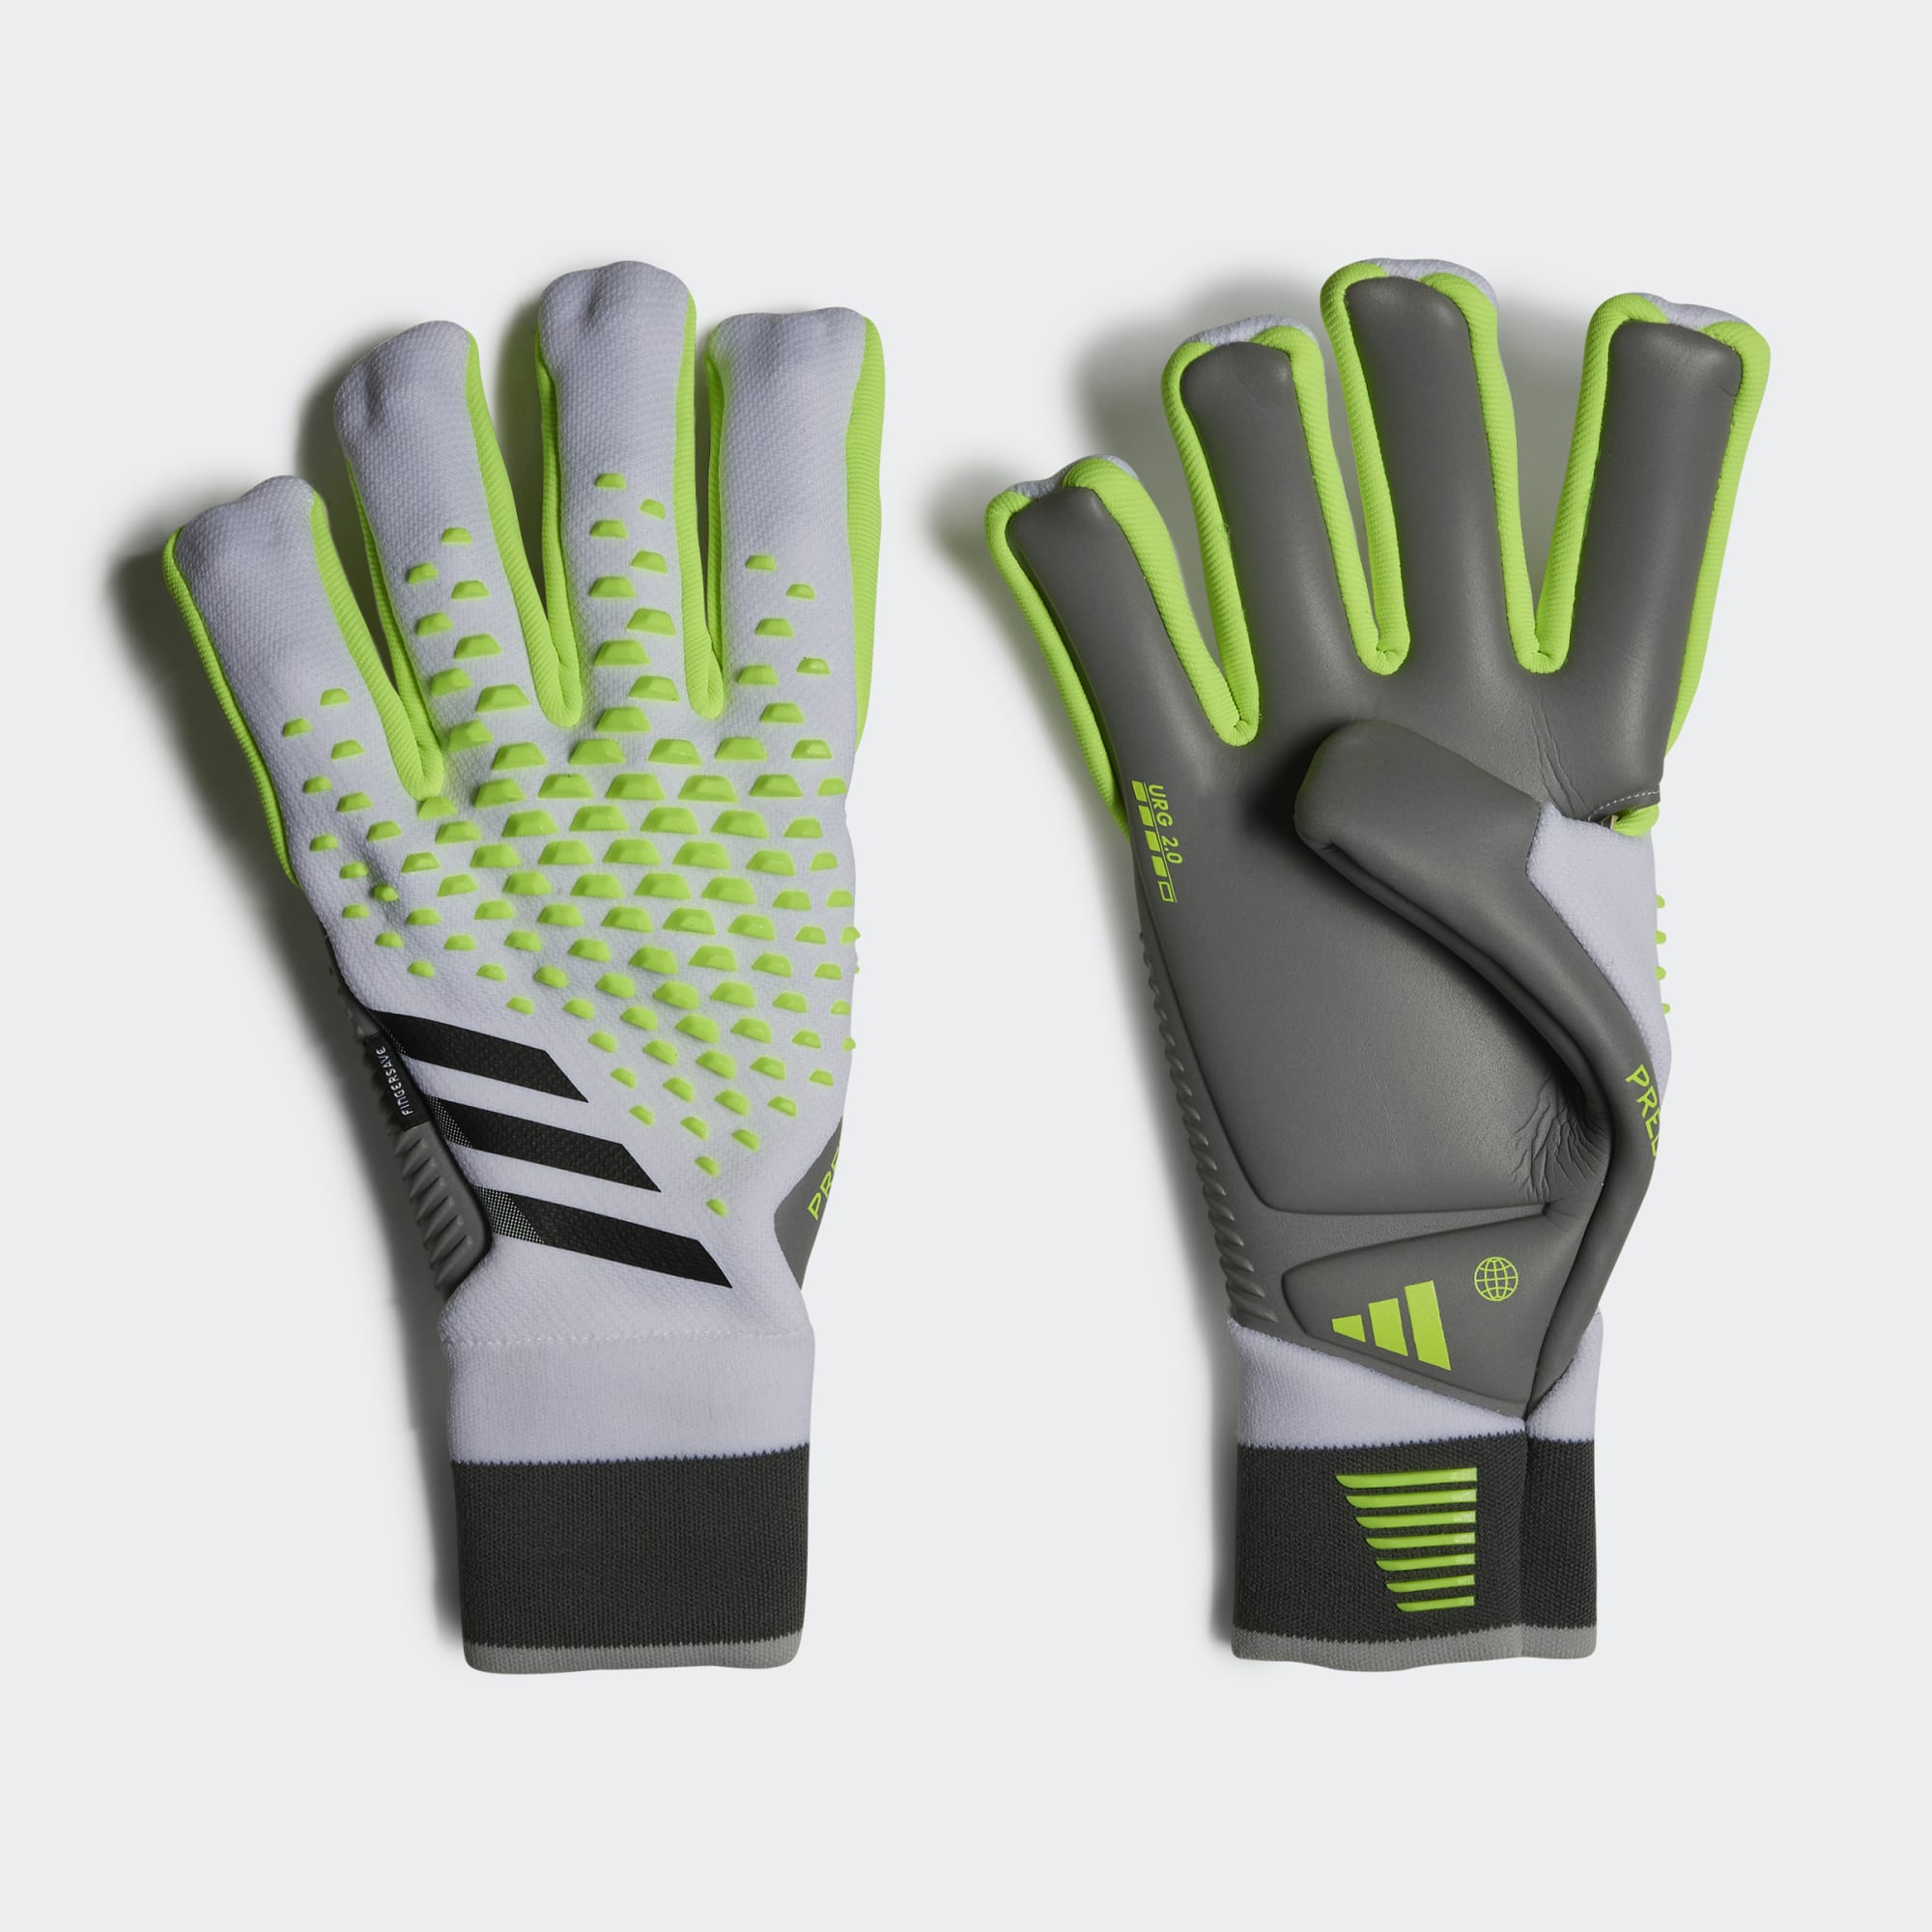 AL RIHLA Predator GL Pro Gloves 🧤 Available Now At Selected